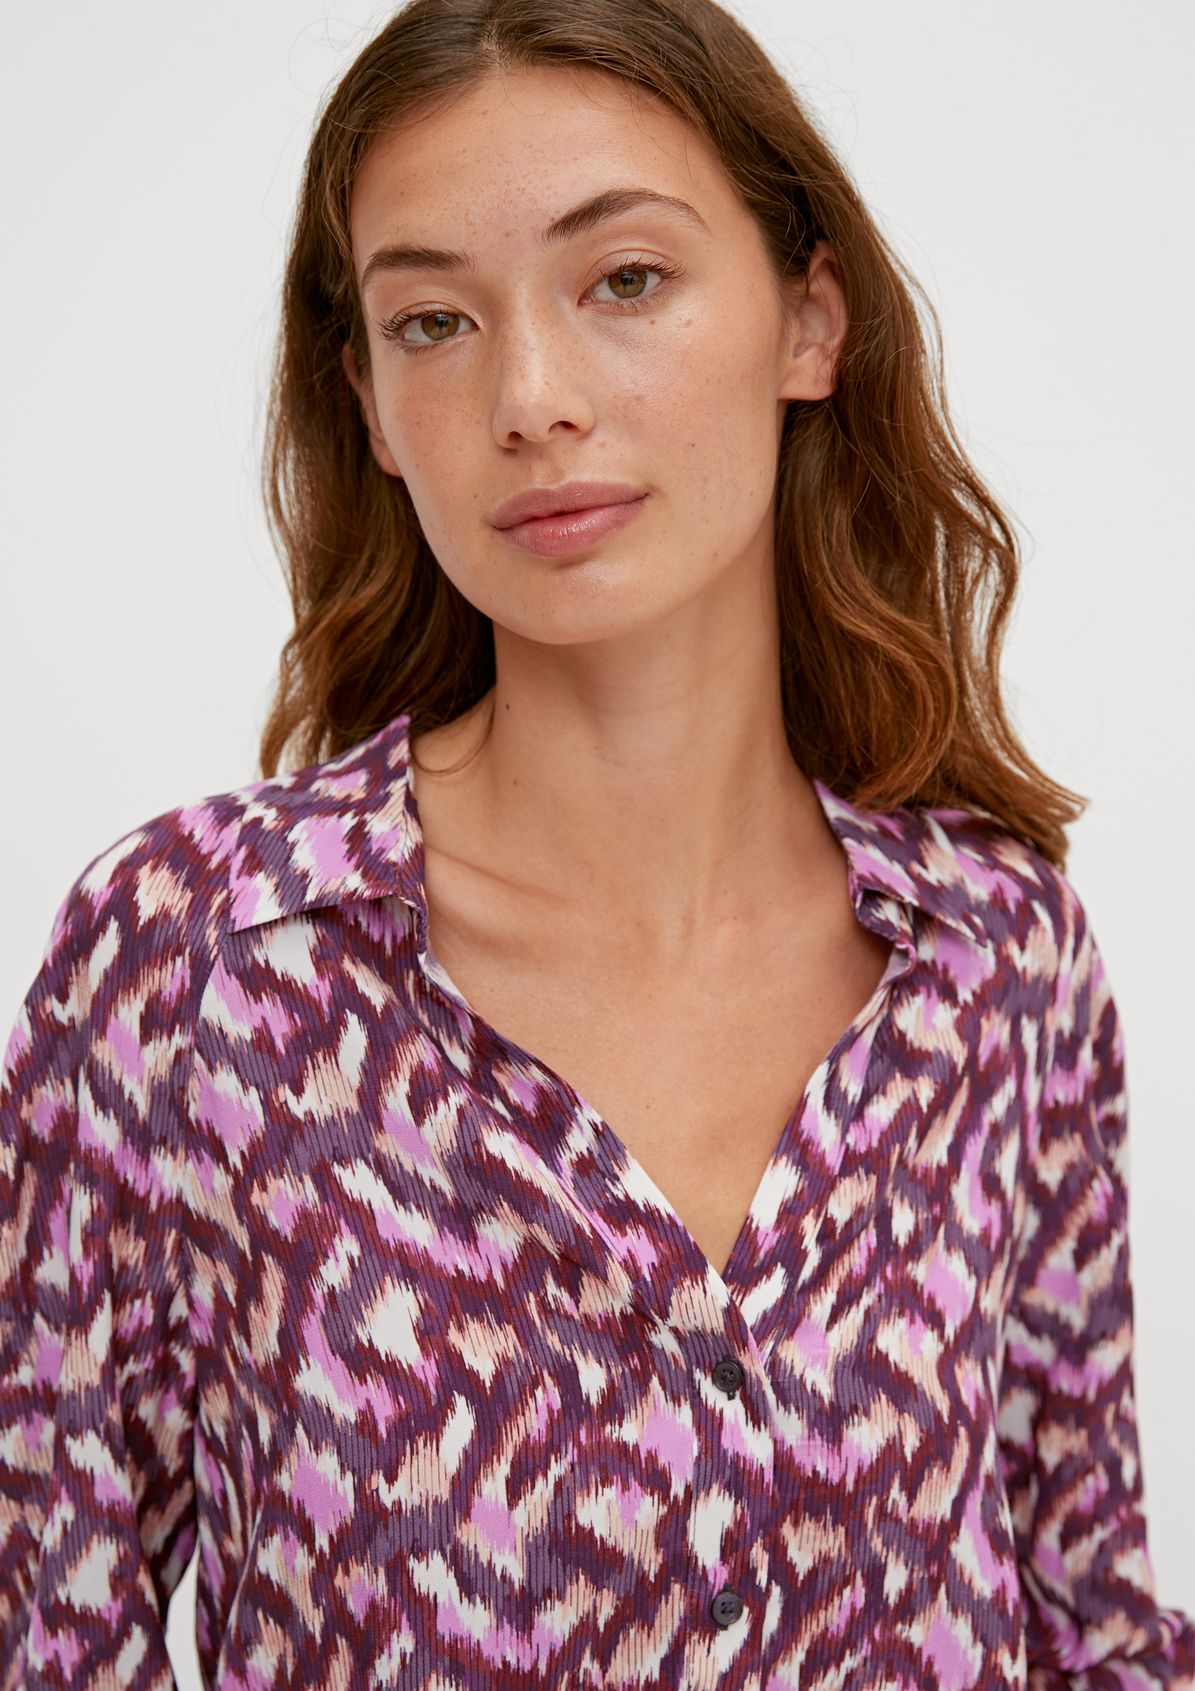 Viscose crêpe blouse from comma